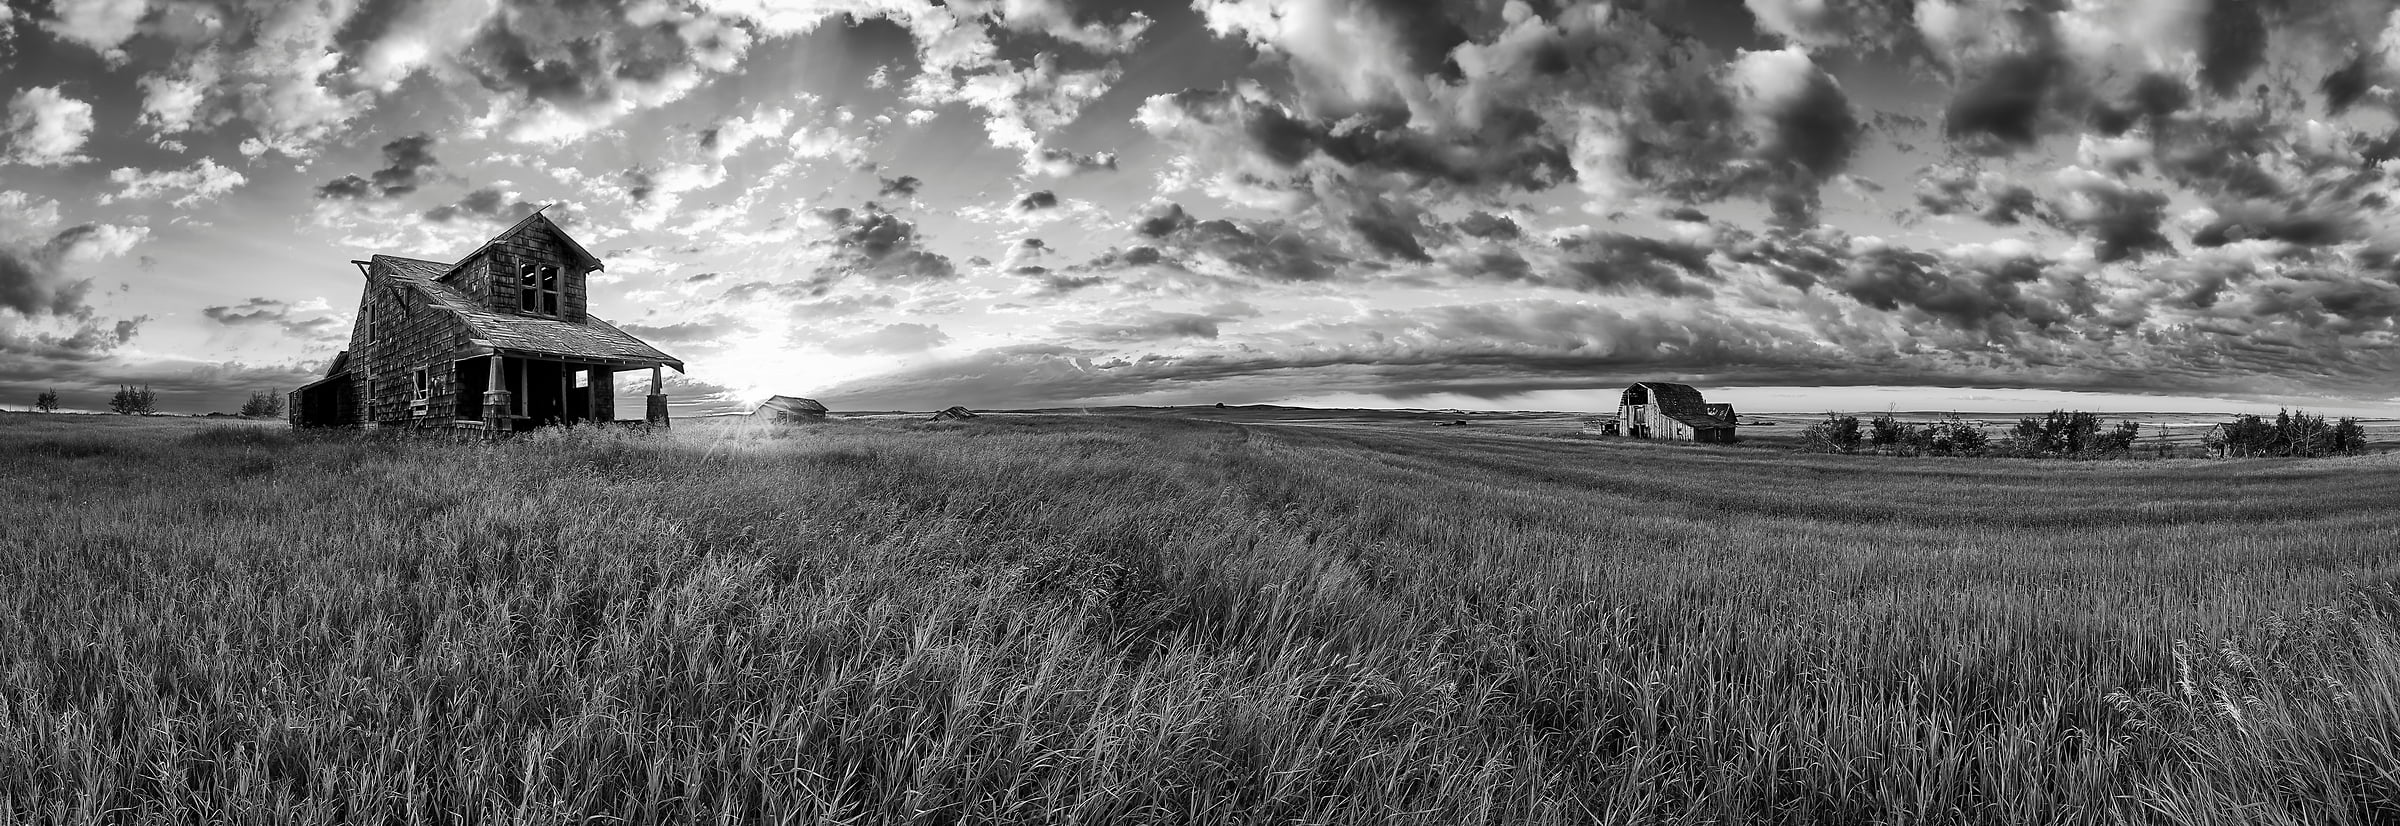 93 megapixels! A very high resolution, large-format VAST photo of farmland, grasslands, the prairie, and an old abandoned house; fine art black and white landscape photo created at sunrise by Scott Dimond on the Great Plains in Alberta, Canada